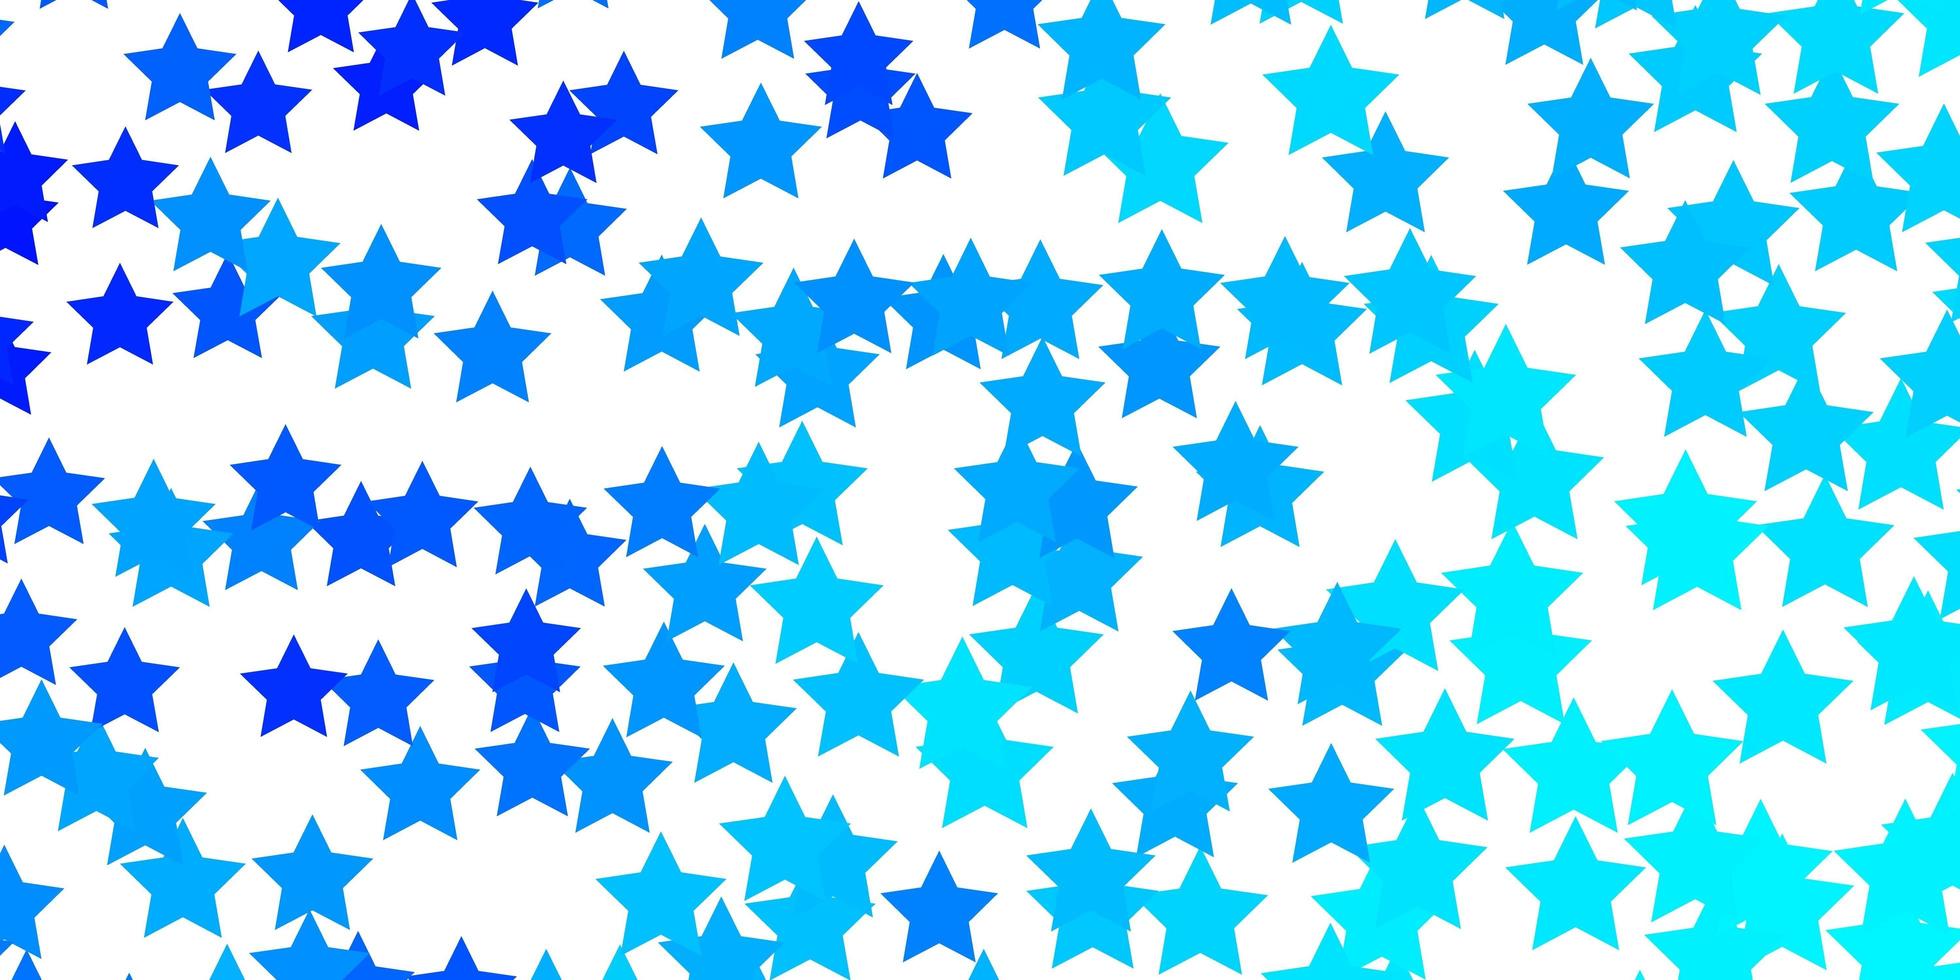 Light BLUE vector texture with beautiful stars Colorful illustration in abstract style with gradient stars Pattern for websites landing pages